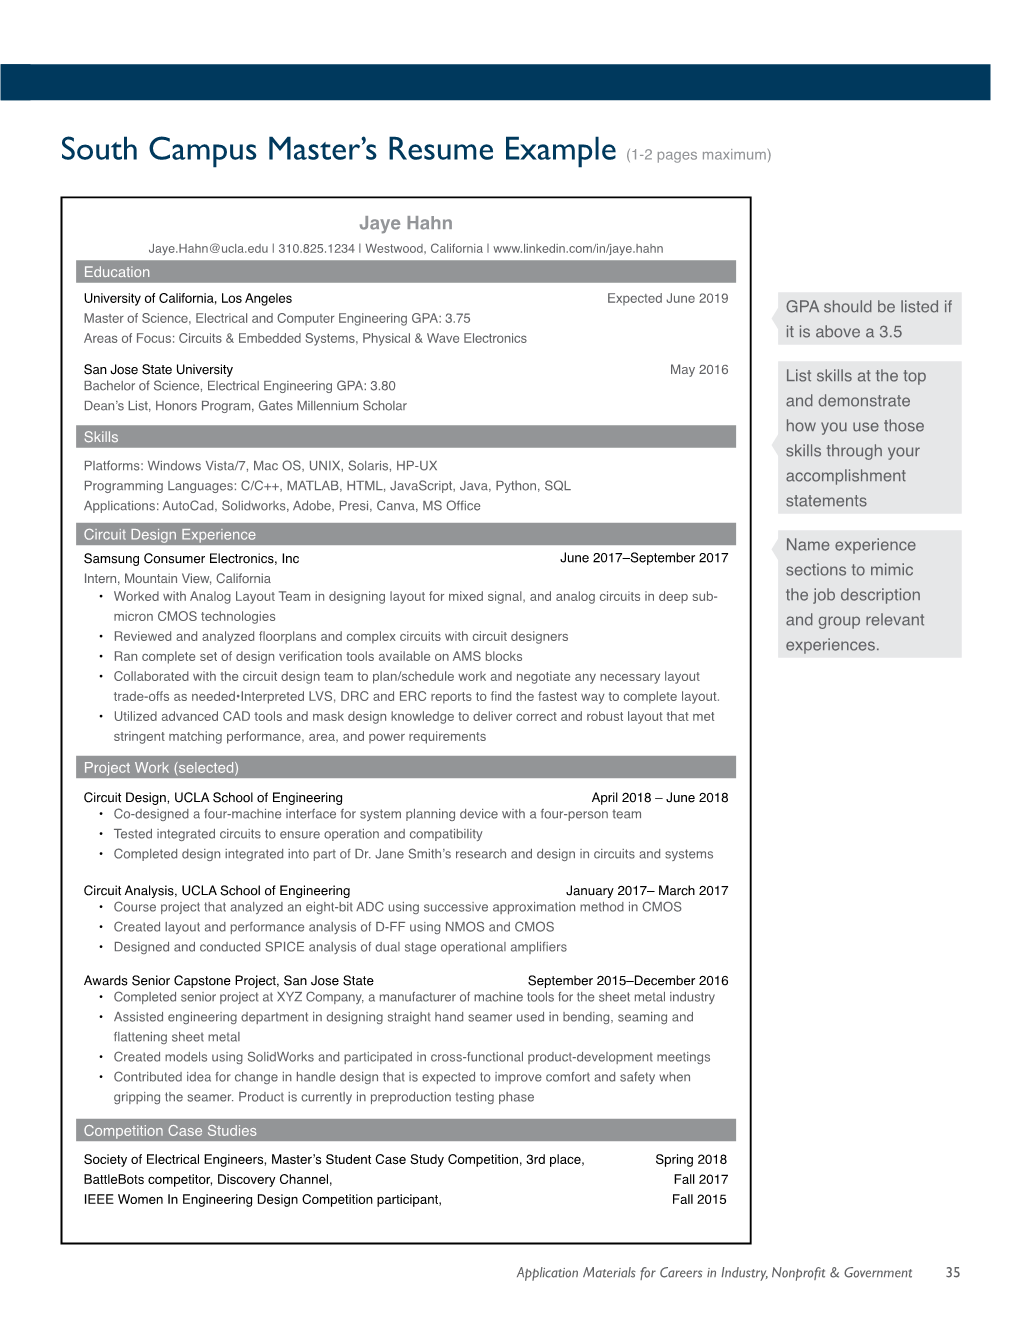 South Campus Master's Resume Example